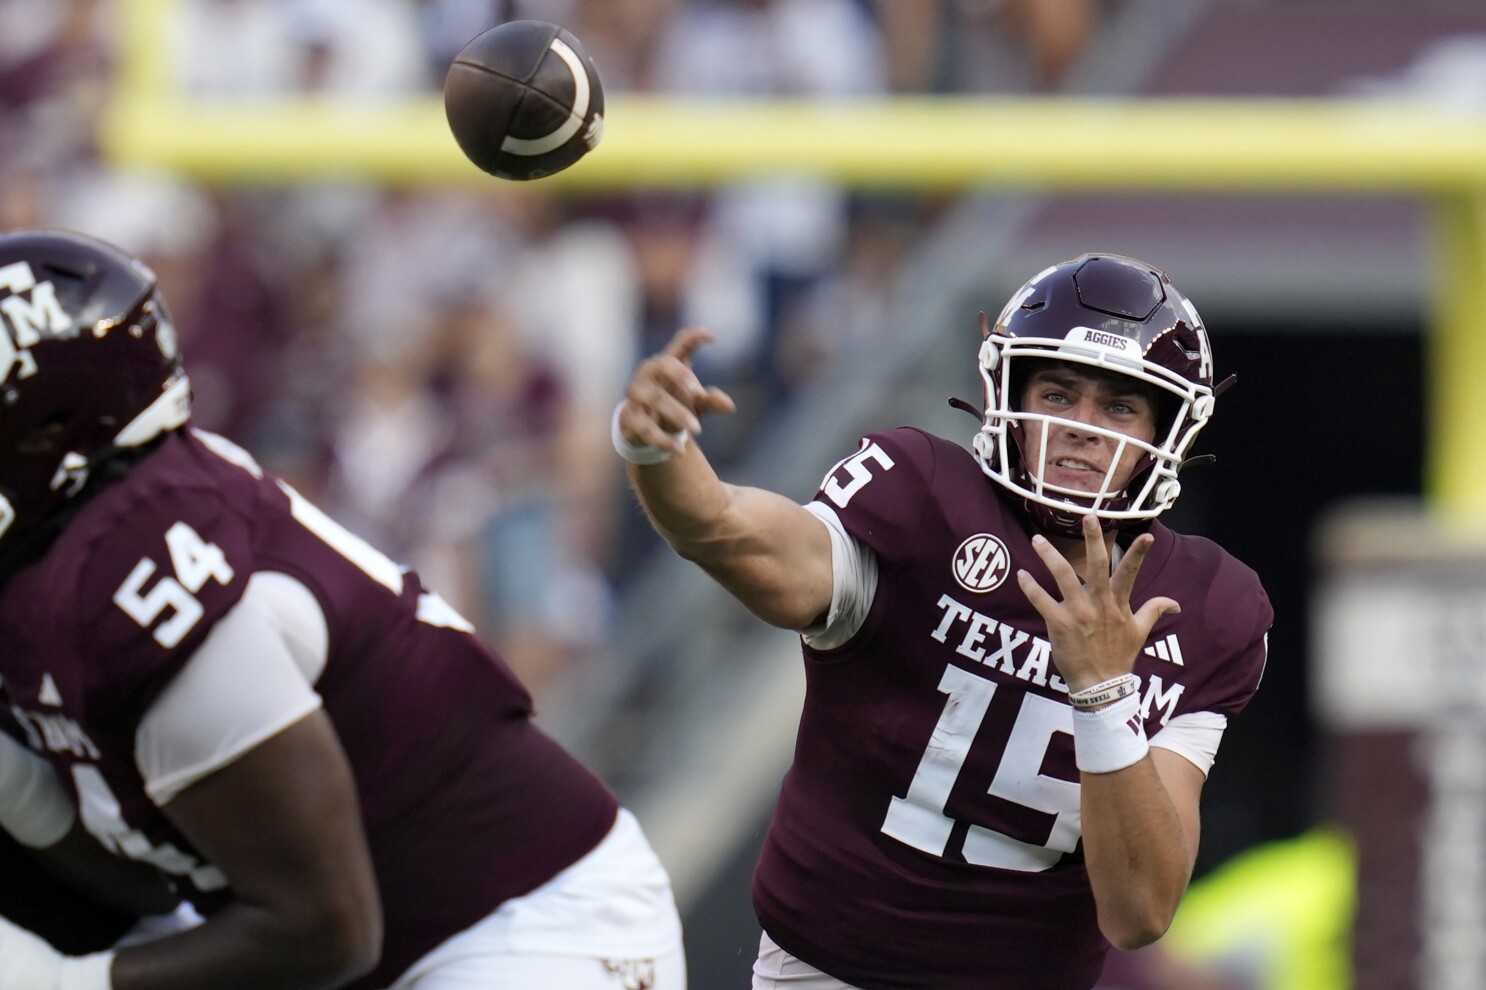 Aggies to Play at Globe Life Field on May 4 - Texas A&M Athletics 